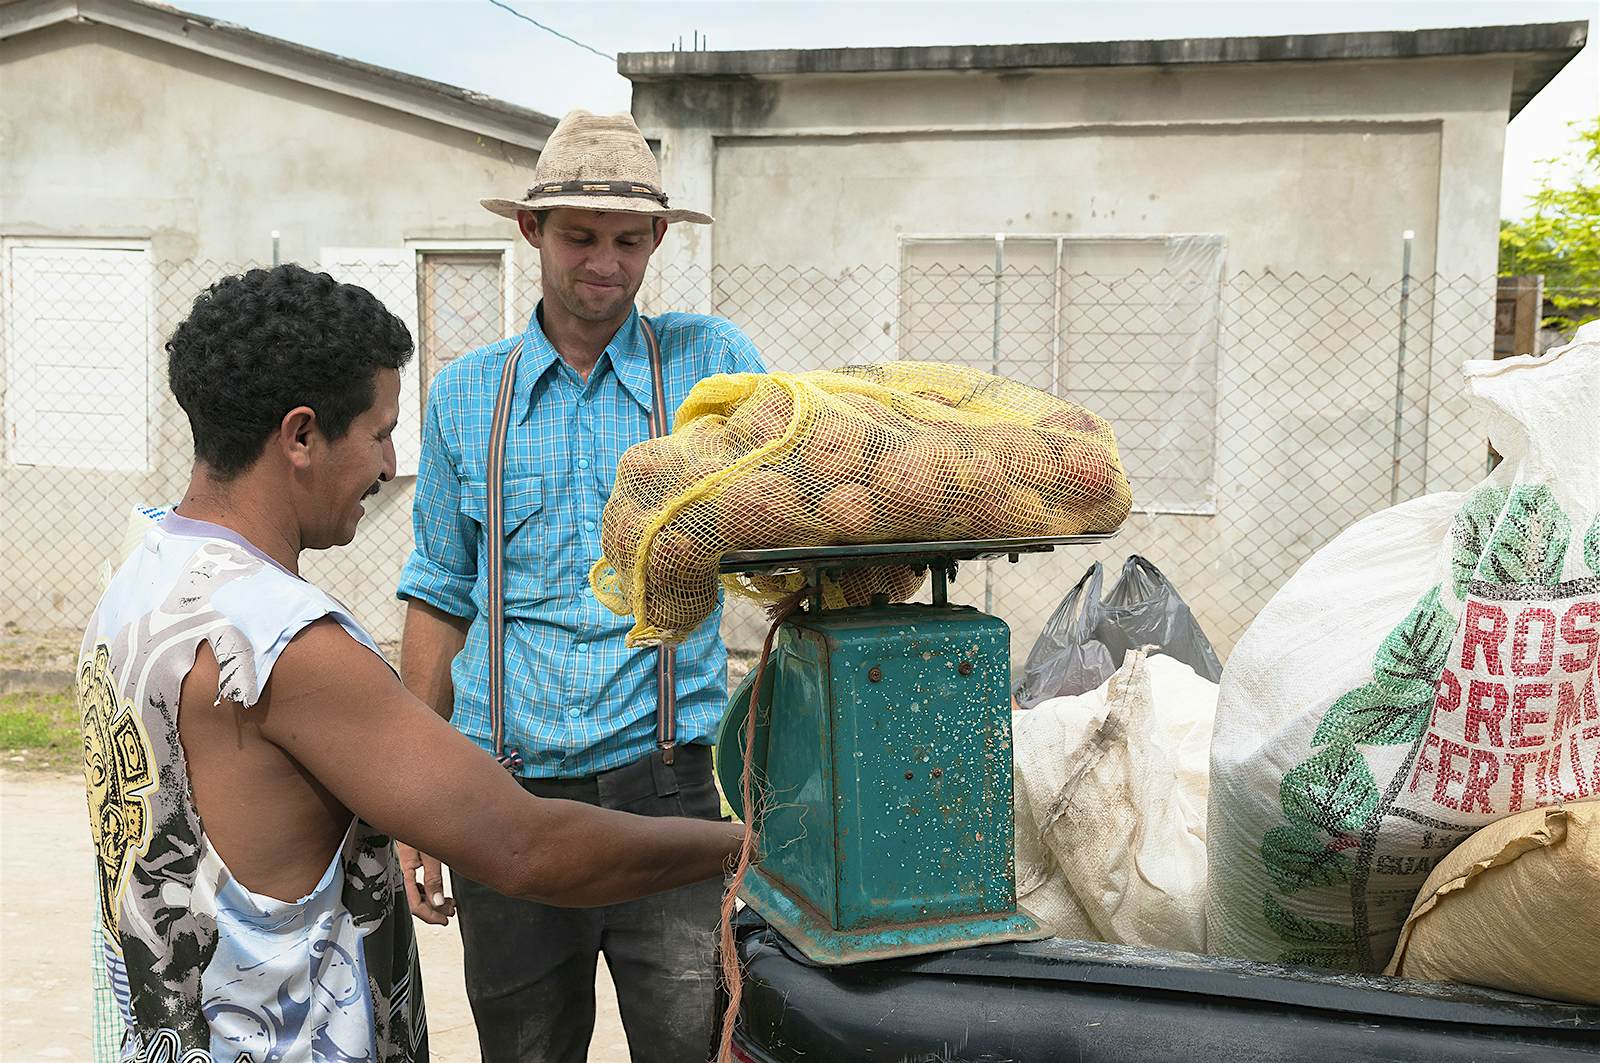 A Mennonite farmer sells produce to a restaurant owner in Sarteneja, Belize © Margie Politzer / Getty Images